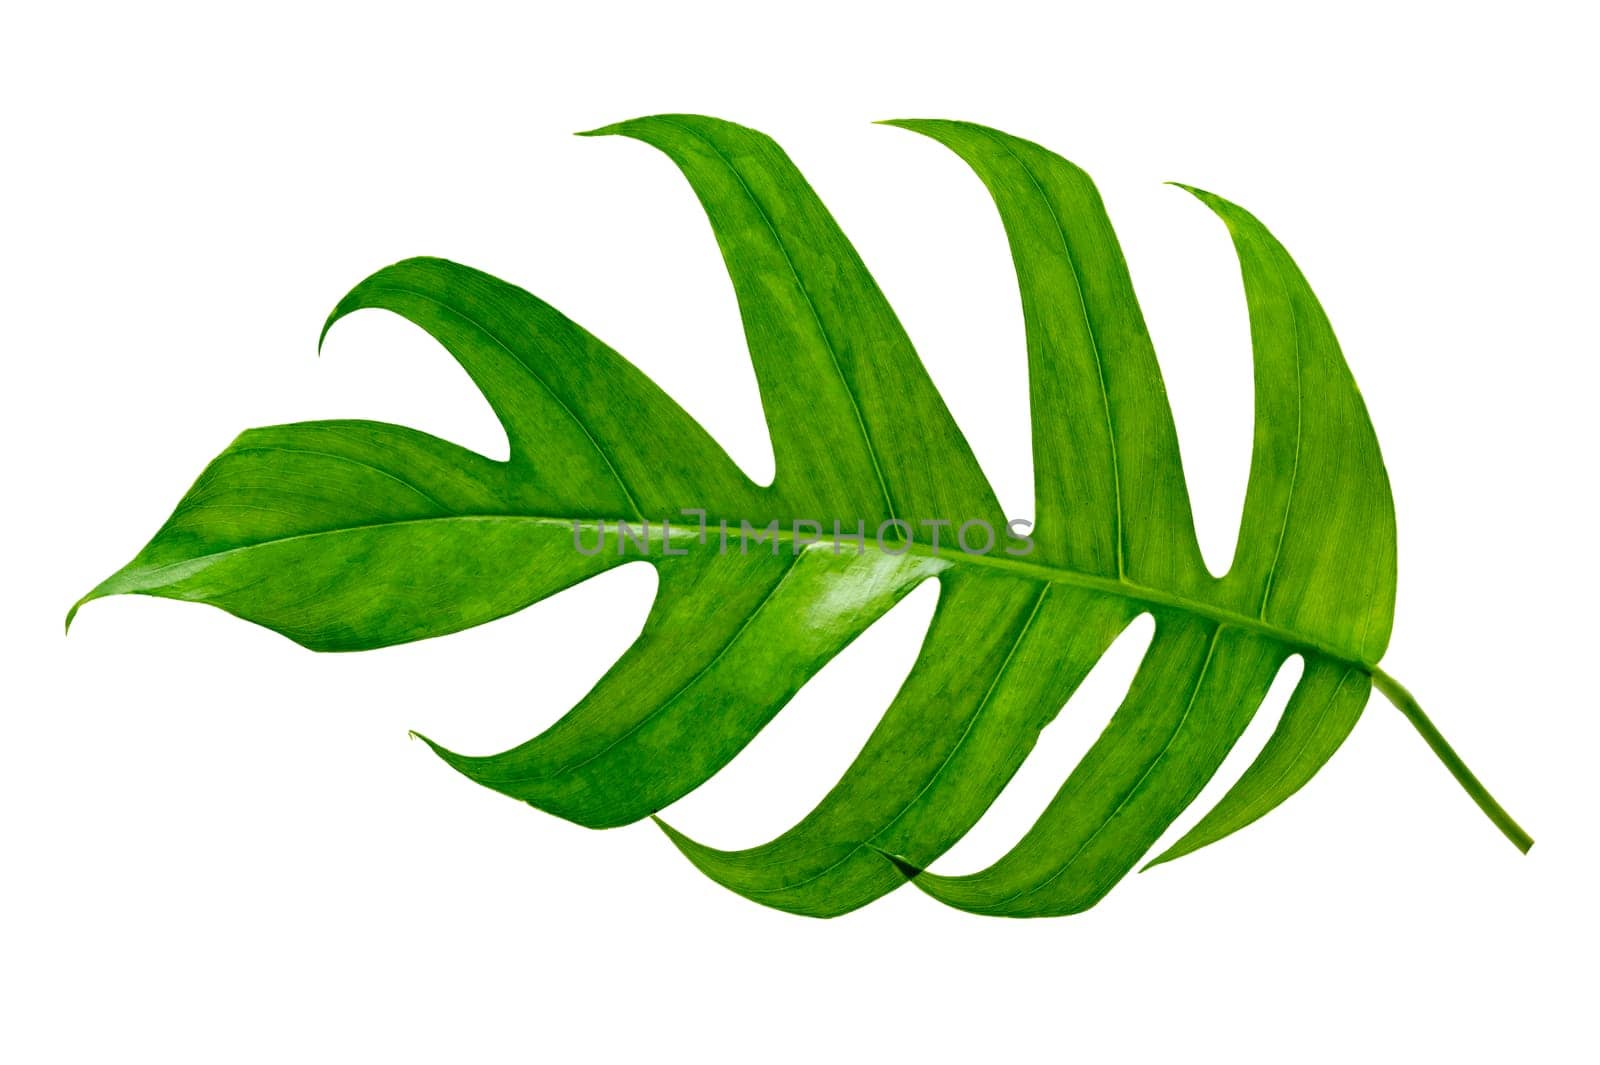 tropical jungle monstera leaves isolated on a white background by sarayut_thaneerat